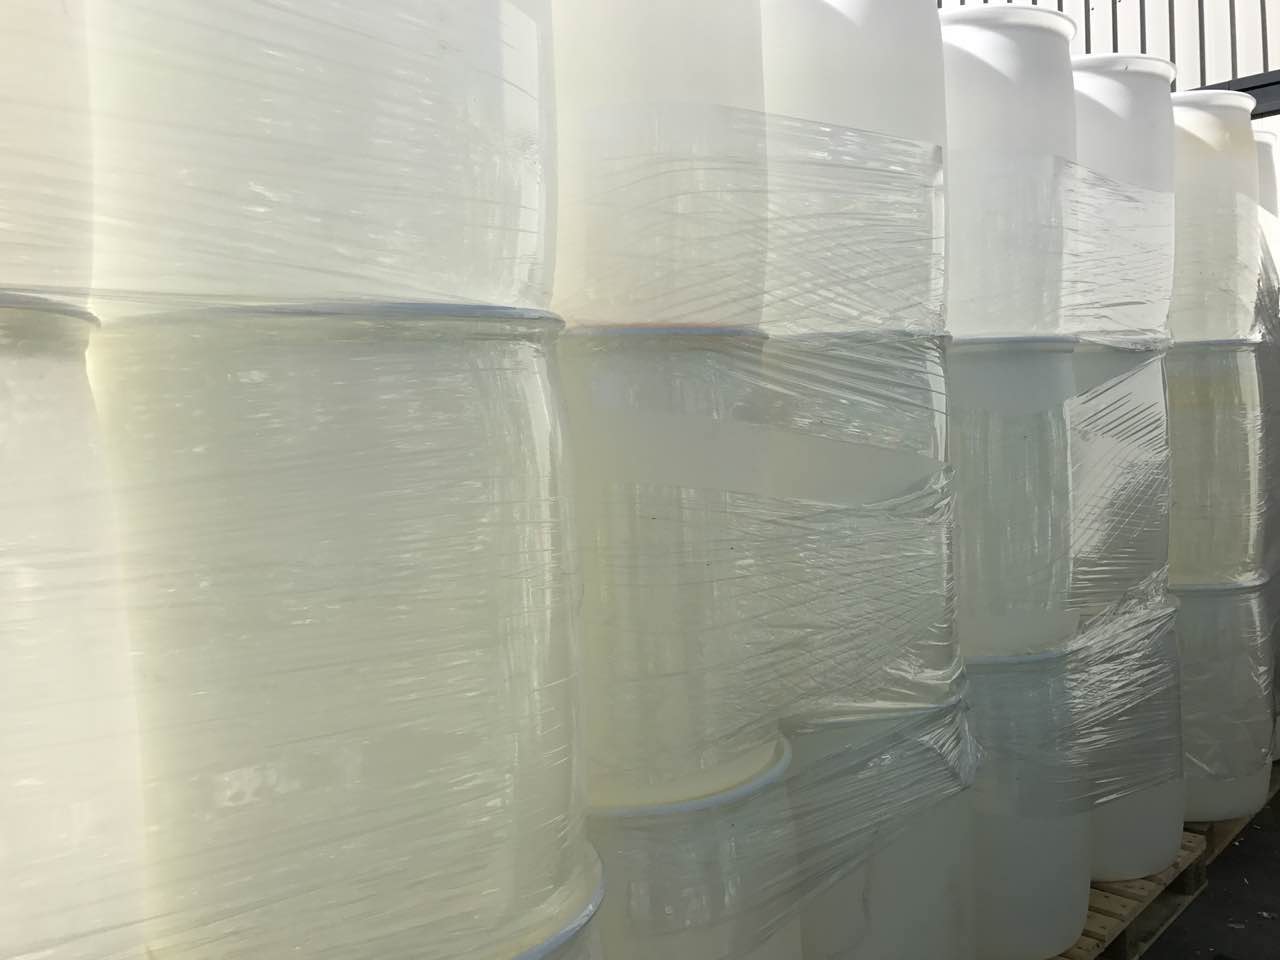 HDPE drums in bales